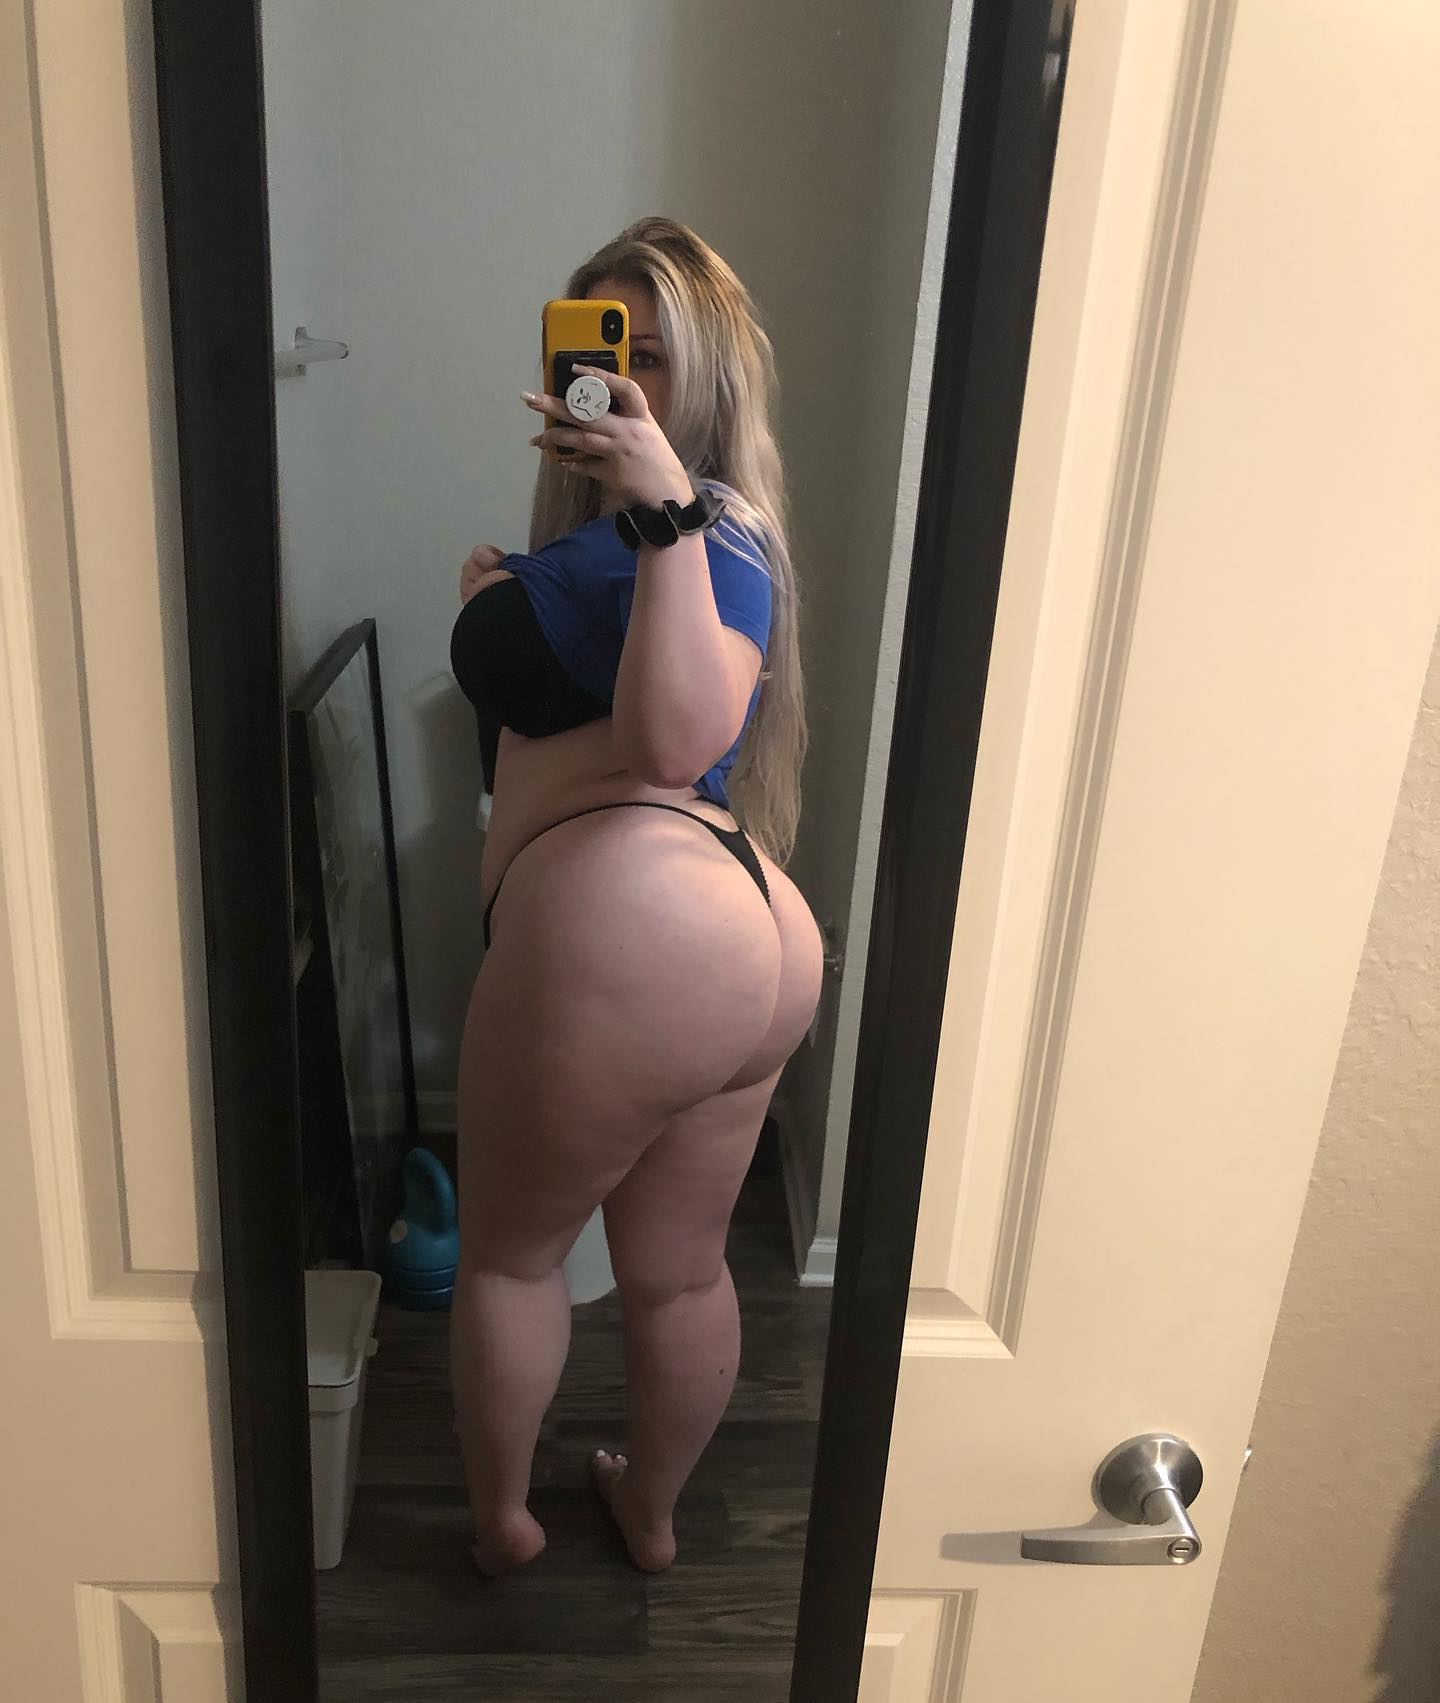 Are you picking me or your girlfriend? 😈 
————————————————————————

#curves #curvy #curvygirl #thicc #thiccgirls #thickgirlproblems #thickwhitegirl #thickthighsprettyeyes #thickthighssaveslives #girl #tinybikinitops #explorepage #explore #explorepage✨ #plussize #plussizemodel #thickwomen #thickwhitegirl #curves #curvy #curvyblond #curvygirl #thicc #thiccgirls #thickgirlproblems #contentcreator #onlyfans #reddit #thickwomen #plussize #beauty #naturalcurves #hourglassbody #fans #baddie #fansonly #spicyaccountant #nsfwtweets #single